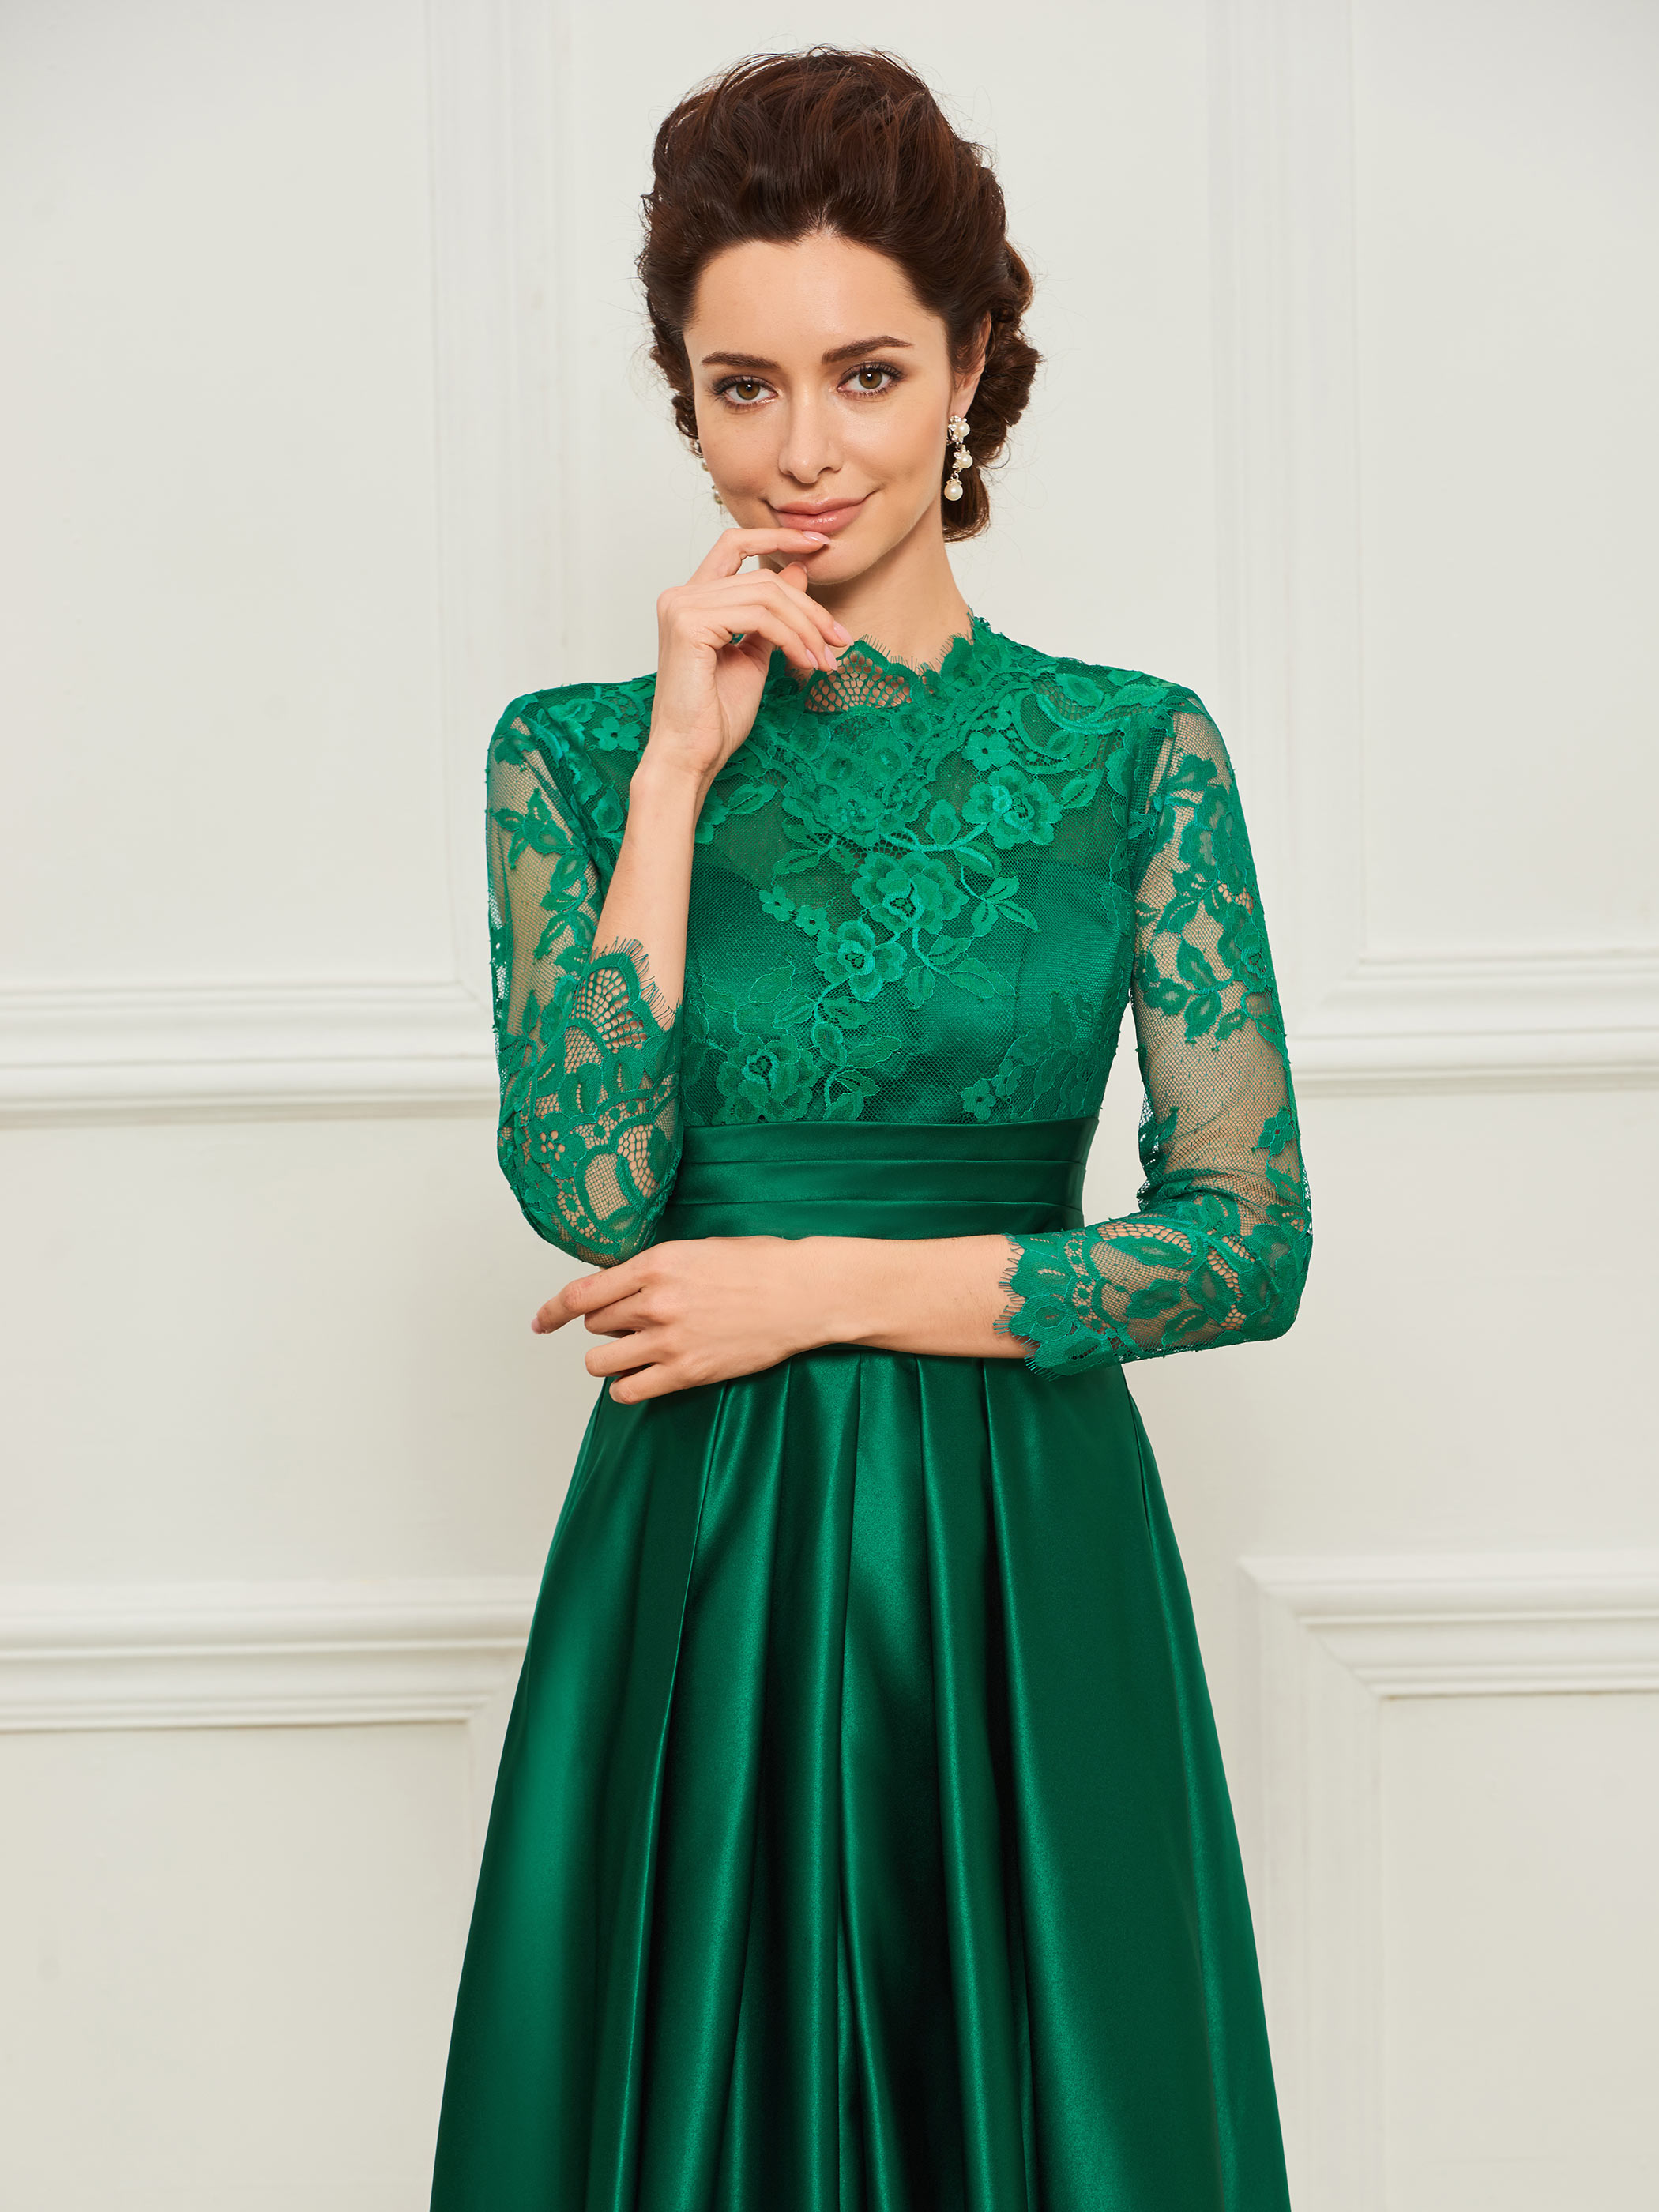 Lace Mother of the Bride Dress with 3/4 Length Sleeve